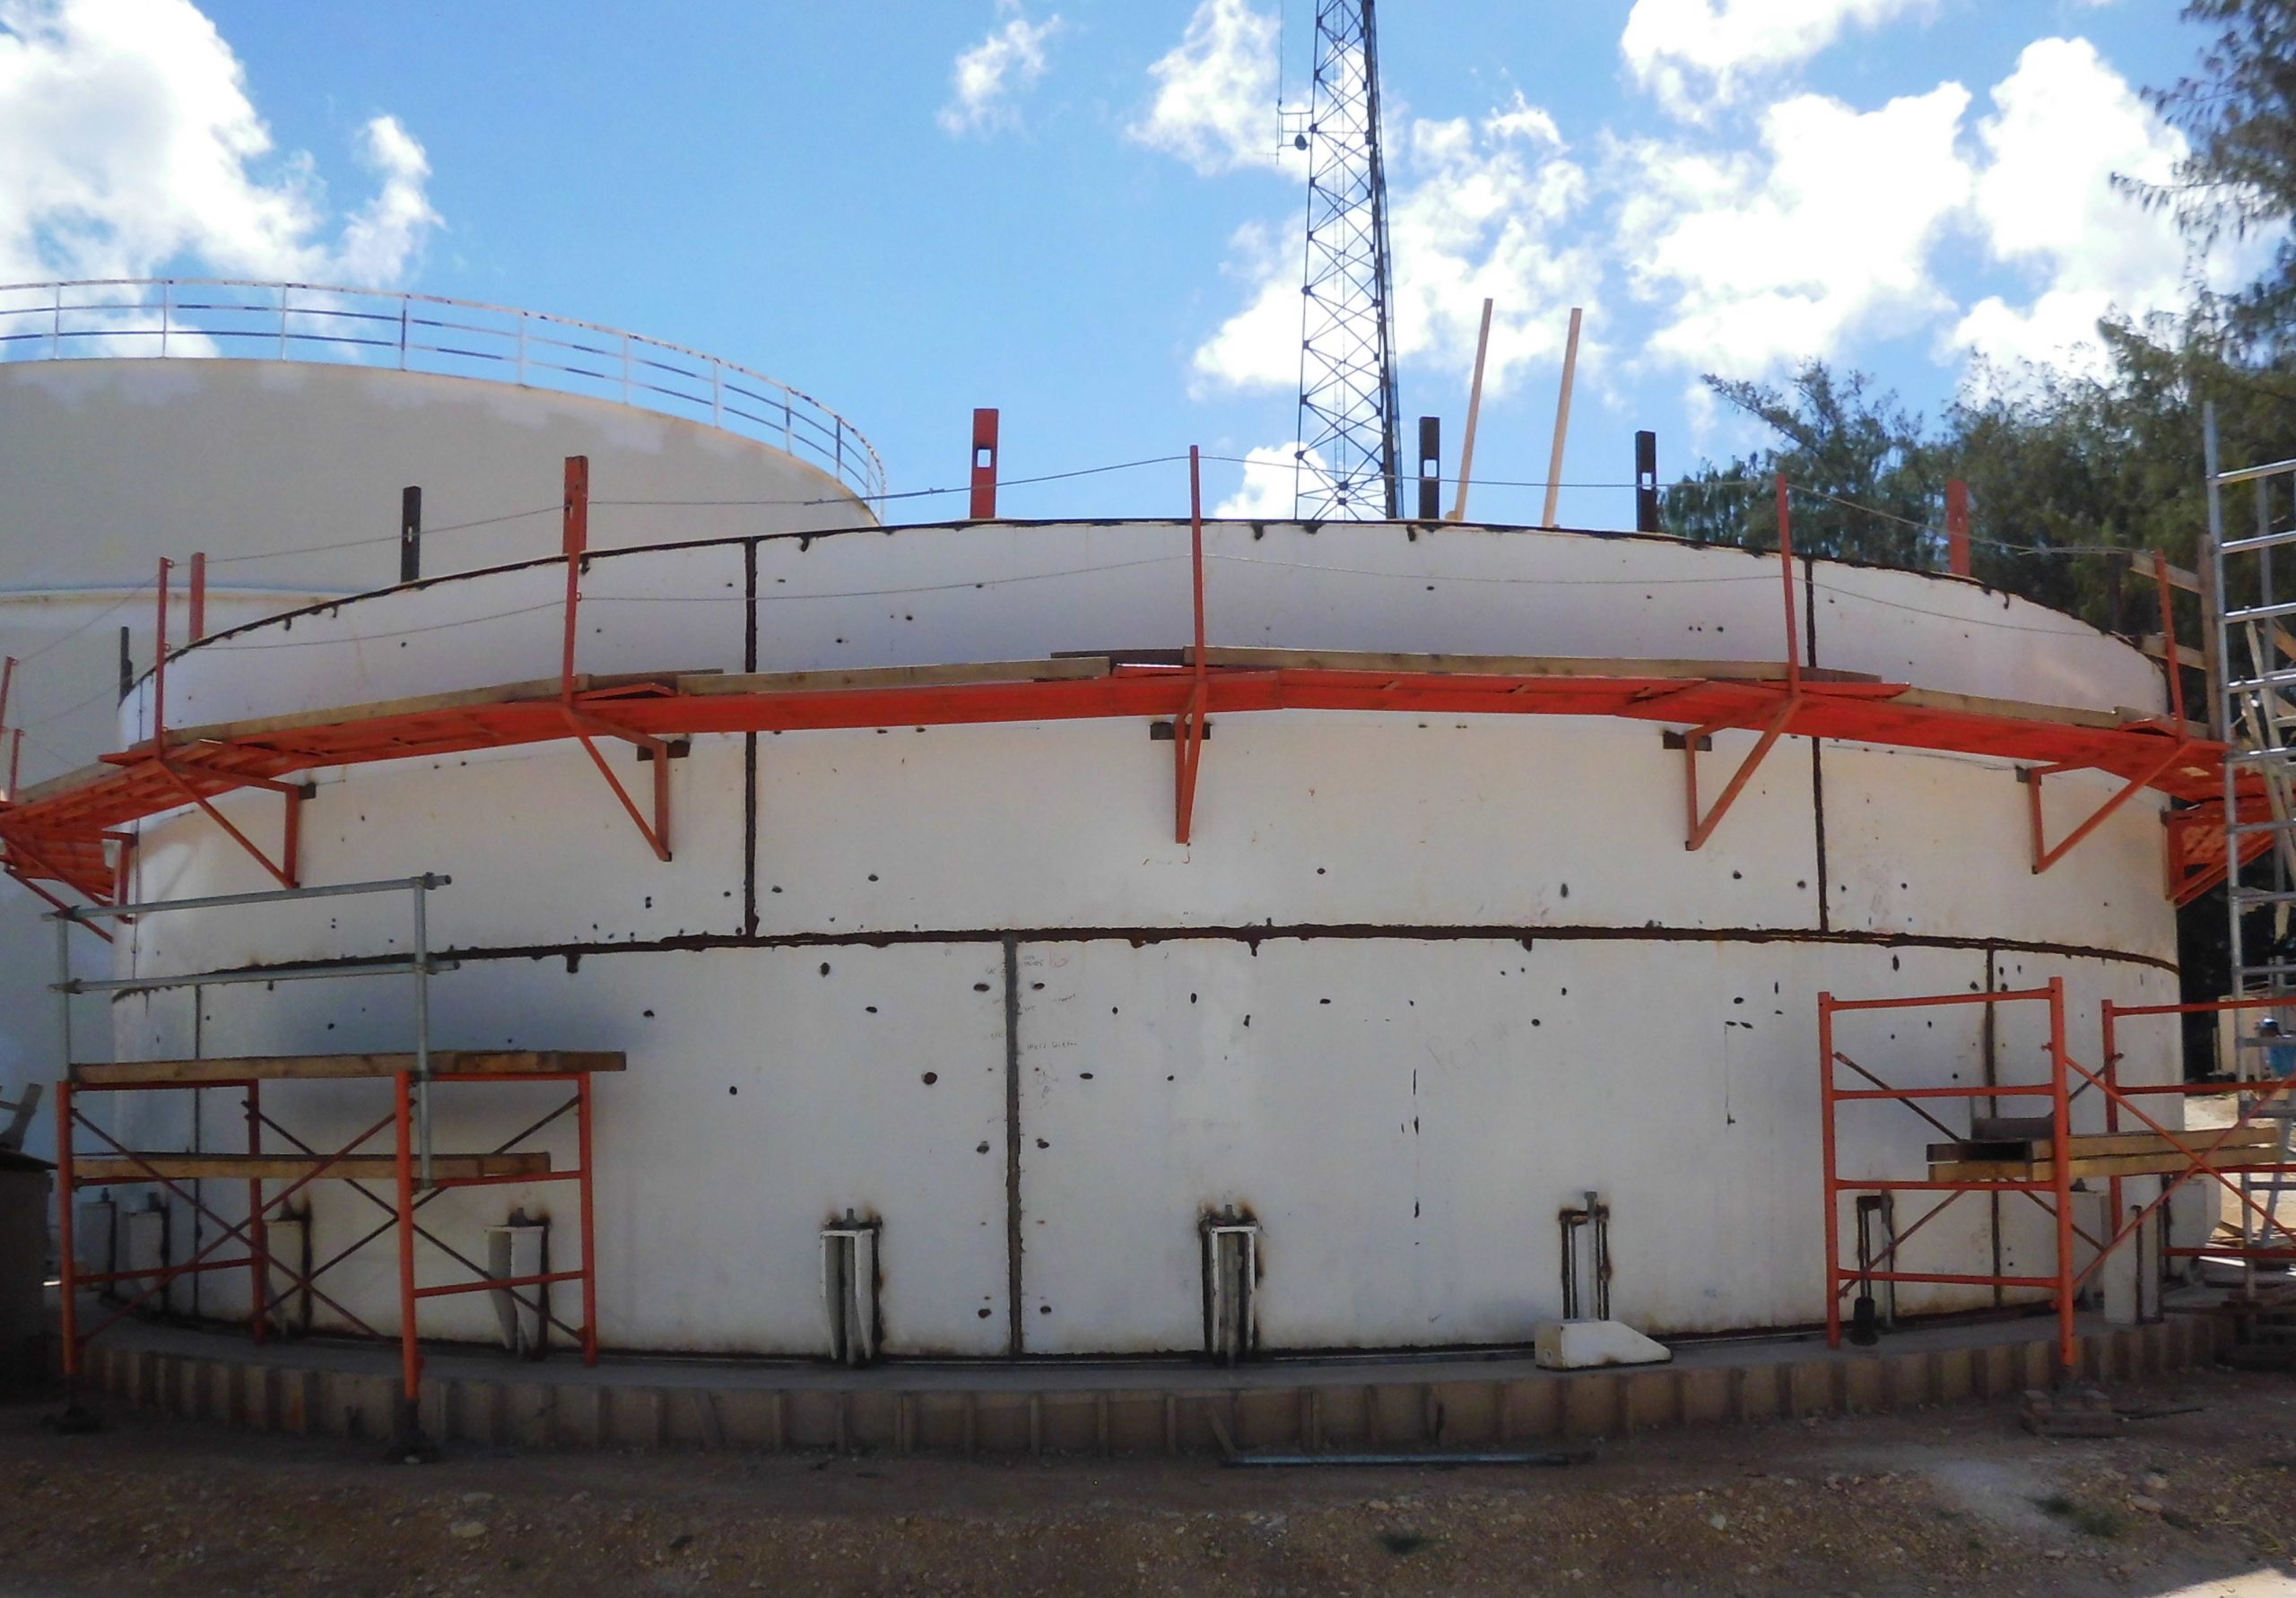 Field Welded Tank being erected in Saipan